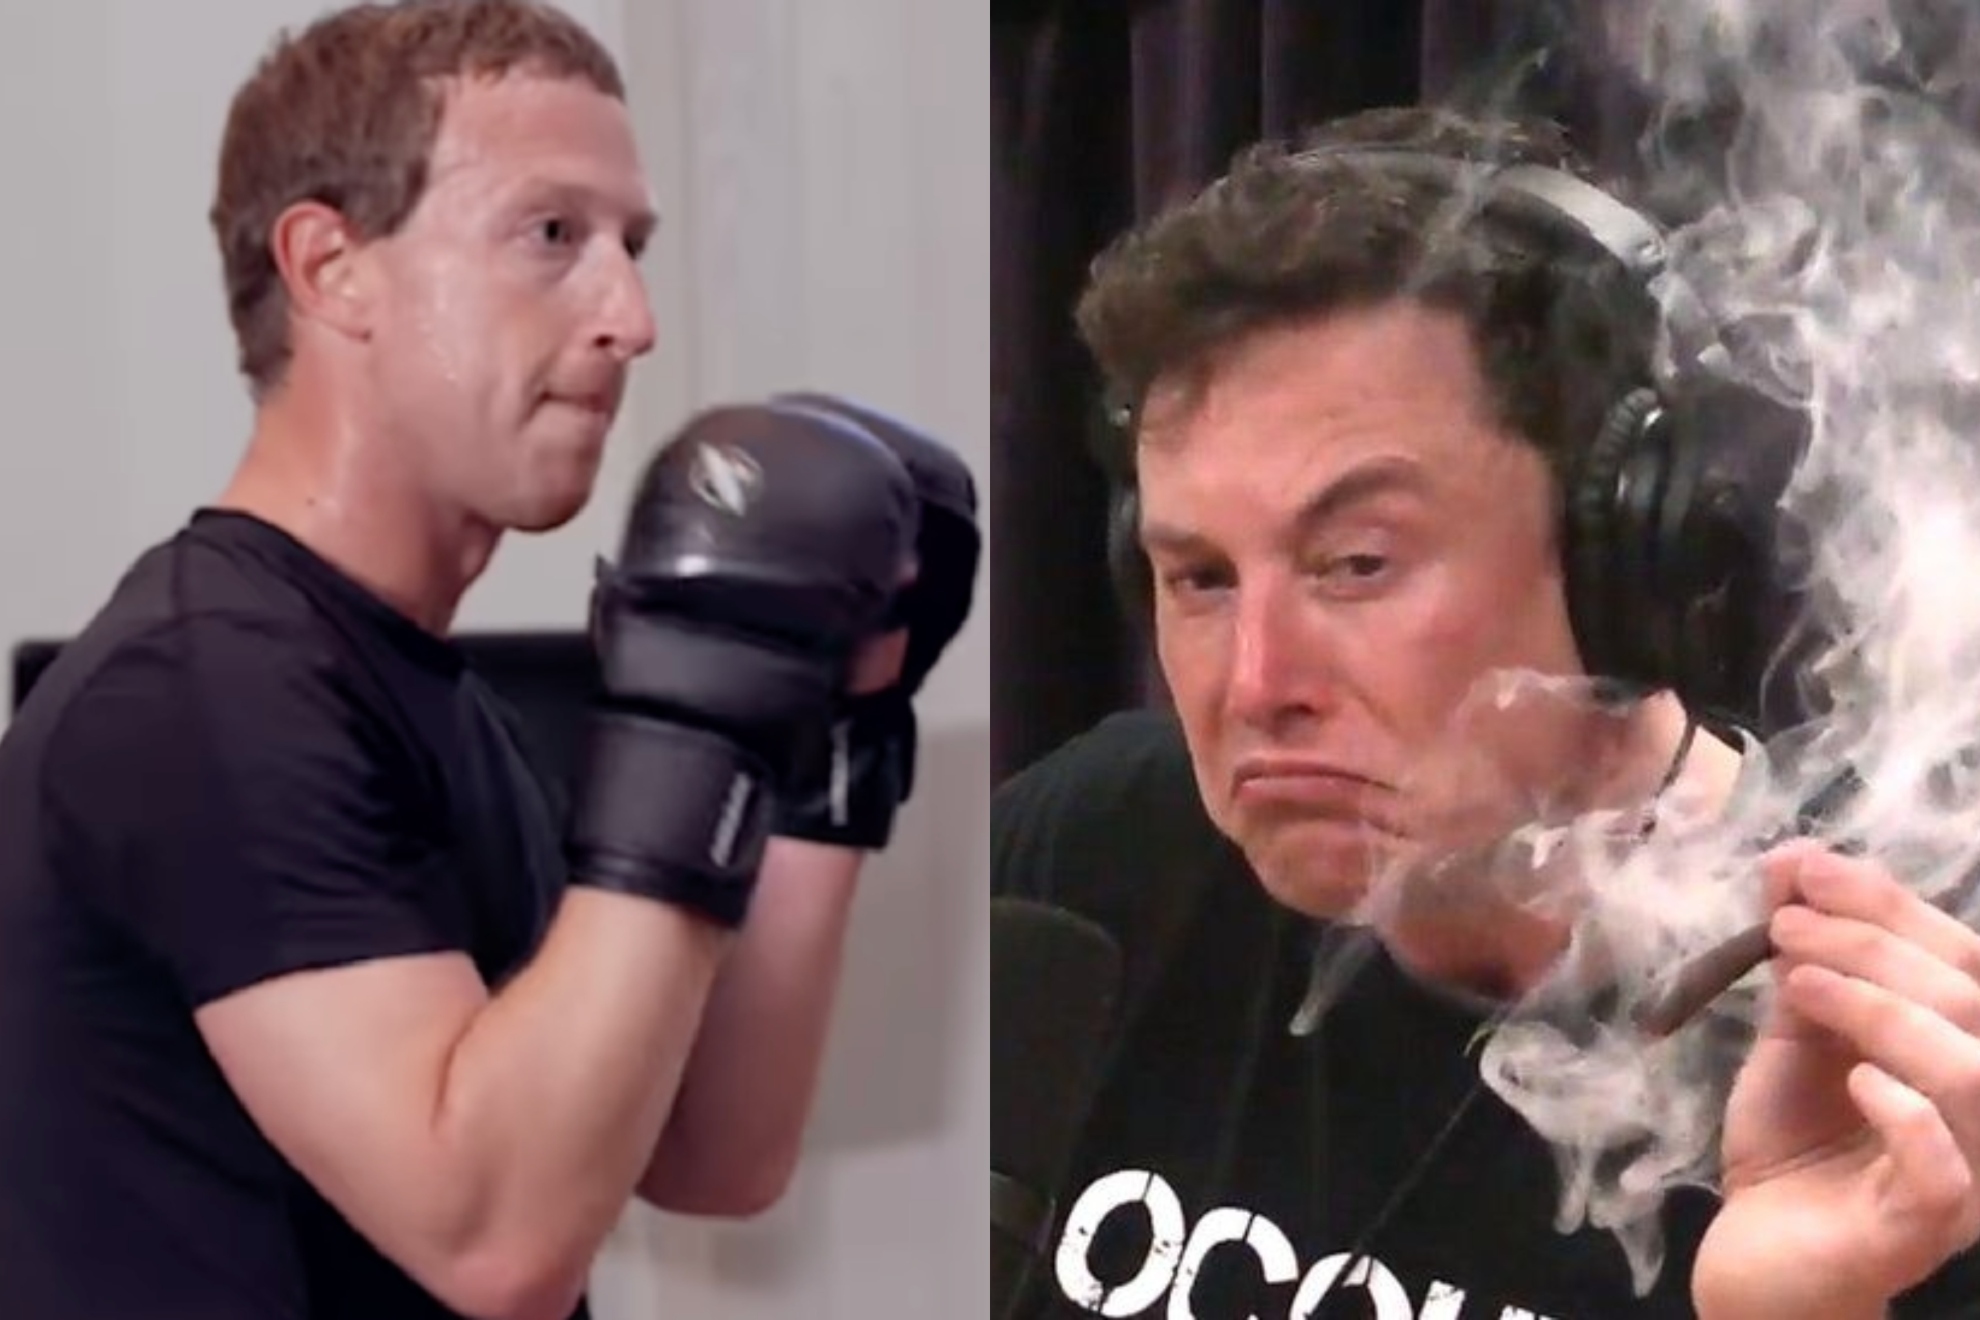 Elon Musk and Mark Zuckerbergs virtual feud intensifies, paving the way for a high-stakes physical showdown